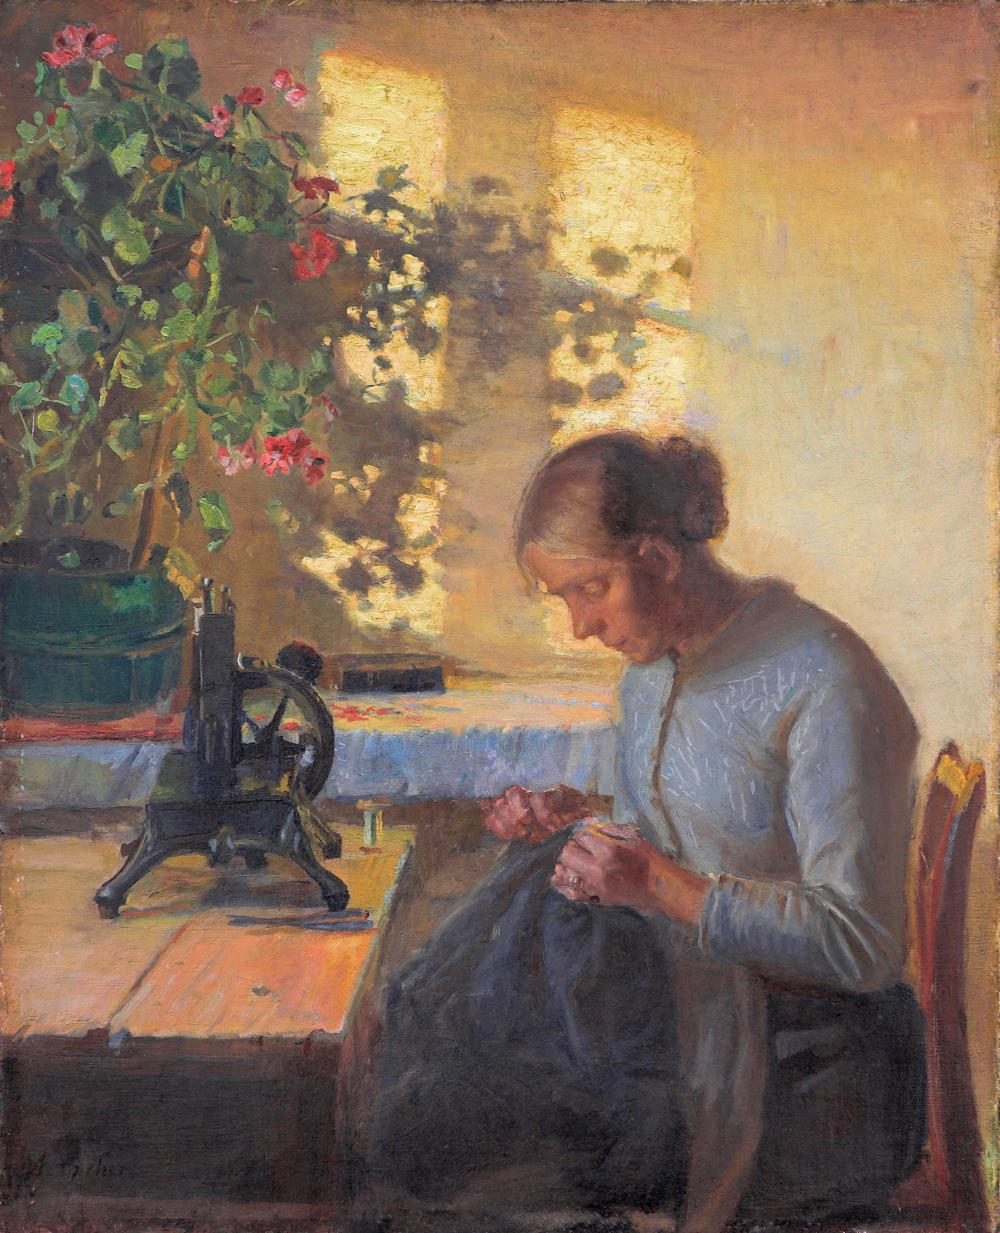 Sewing Fisherman's Wife by Anna Ancher, 1890